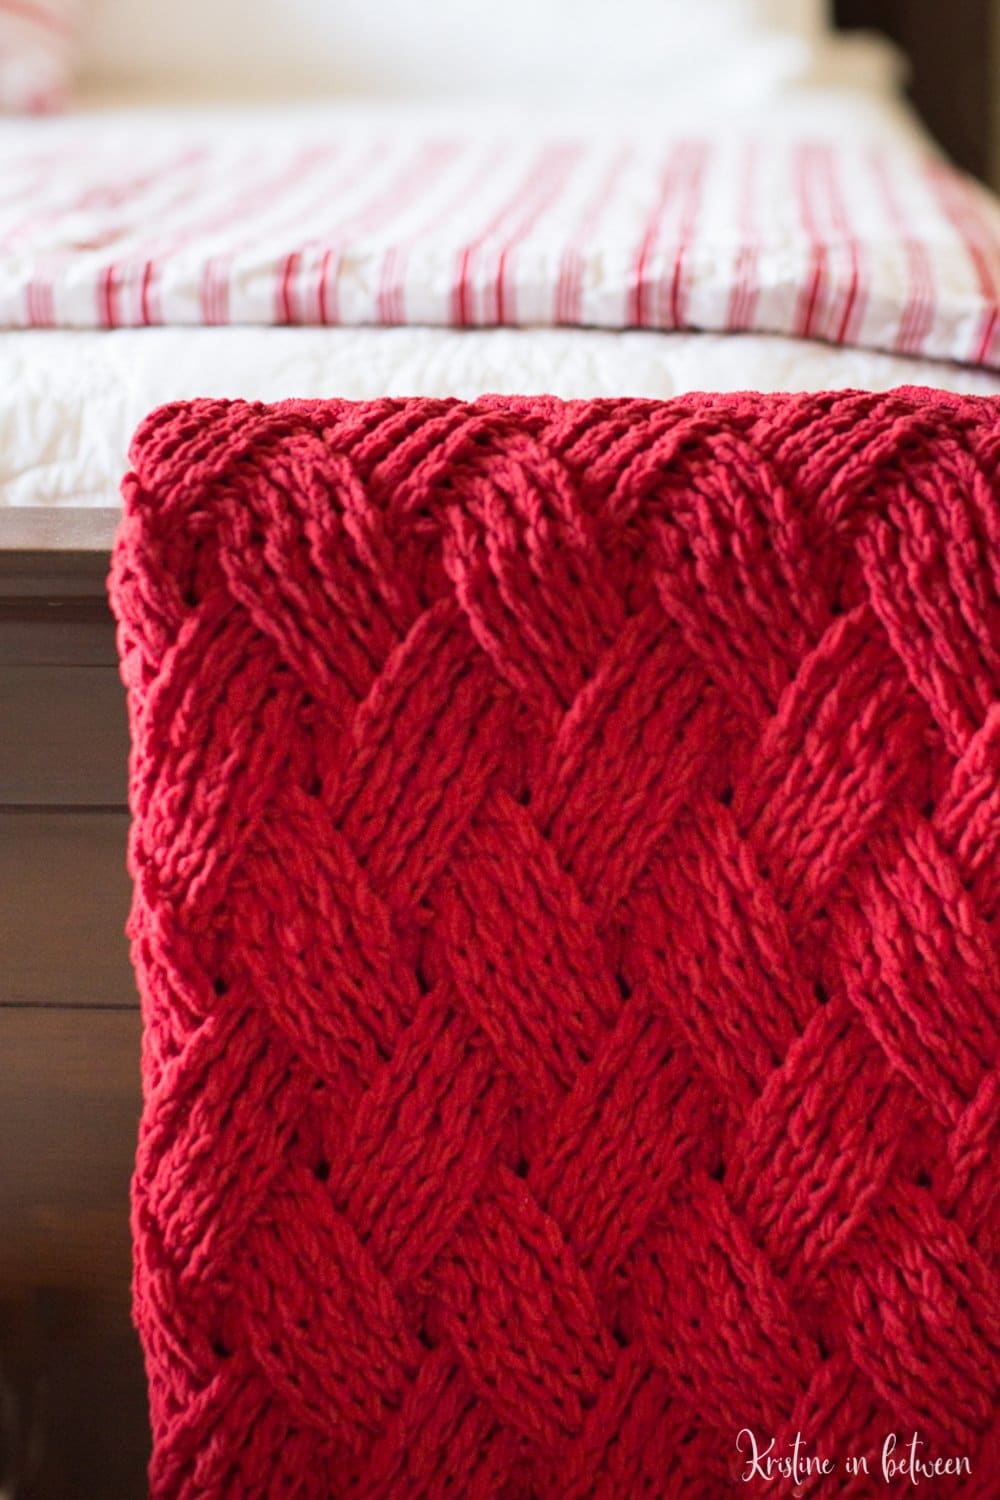 A red crocheted blanket fold on the end of a wooden bed.